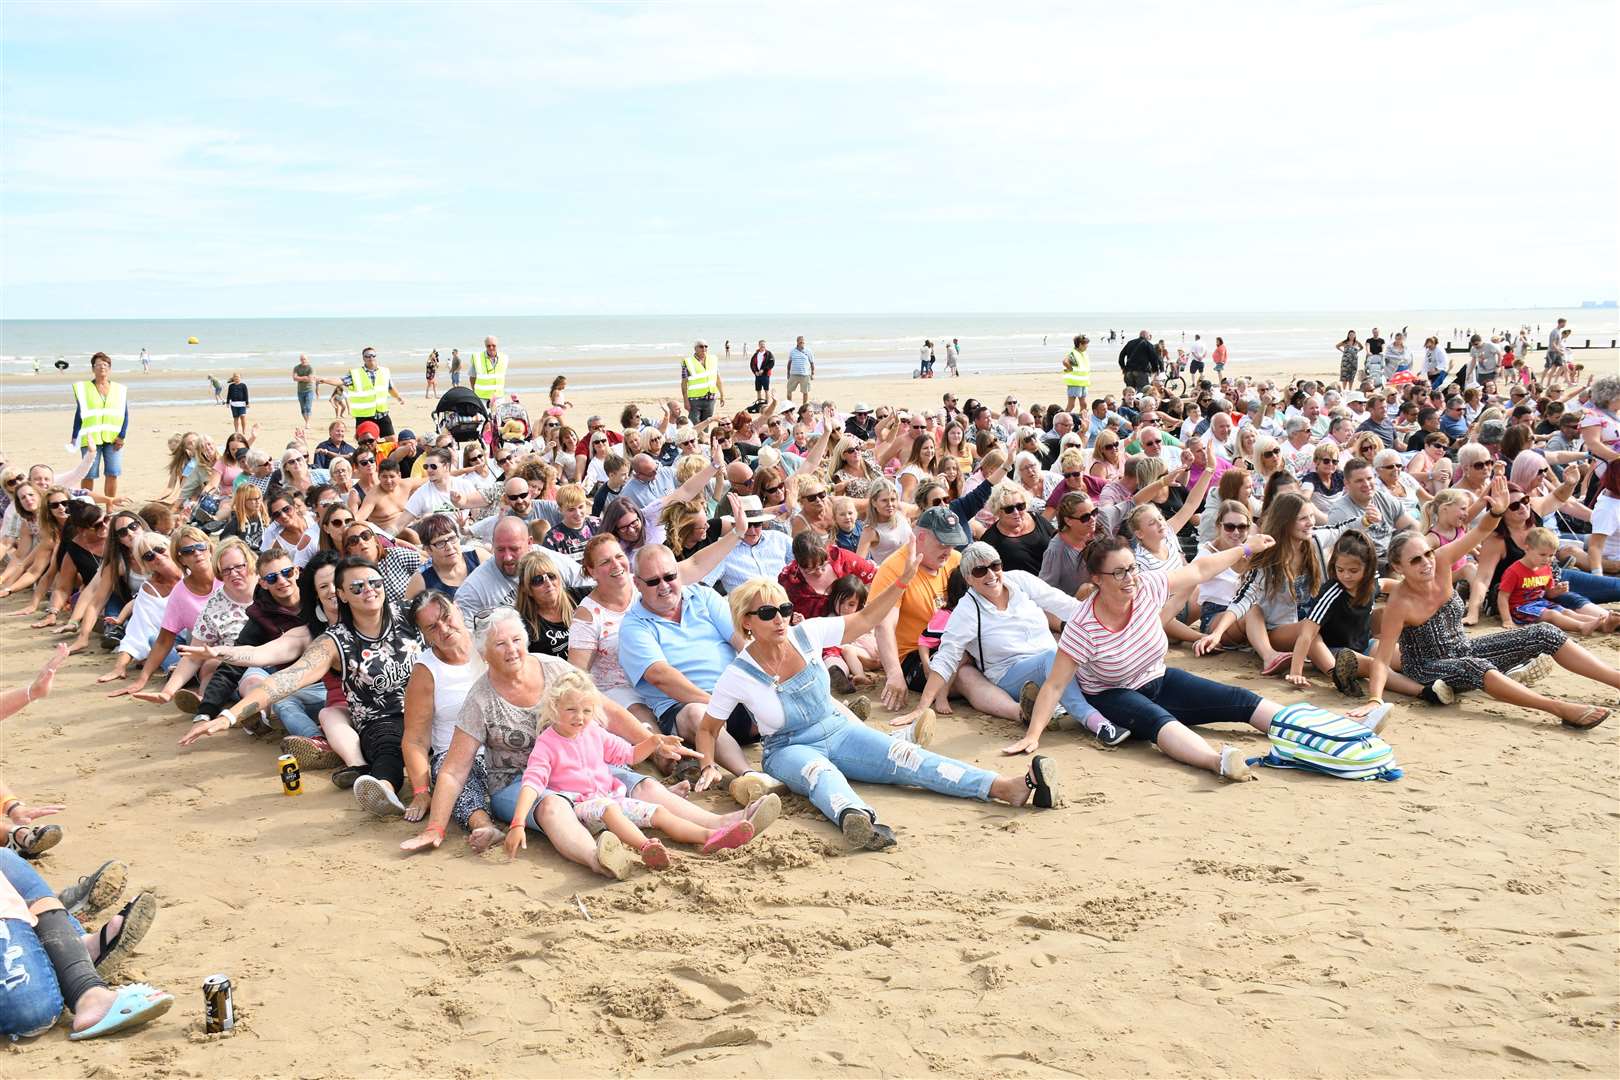 Oops Upside Your Head World Record attempt in Dymchurch. Credit: David Knight (3596152)